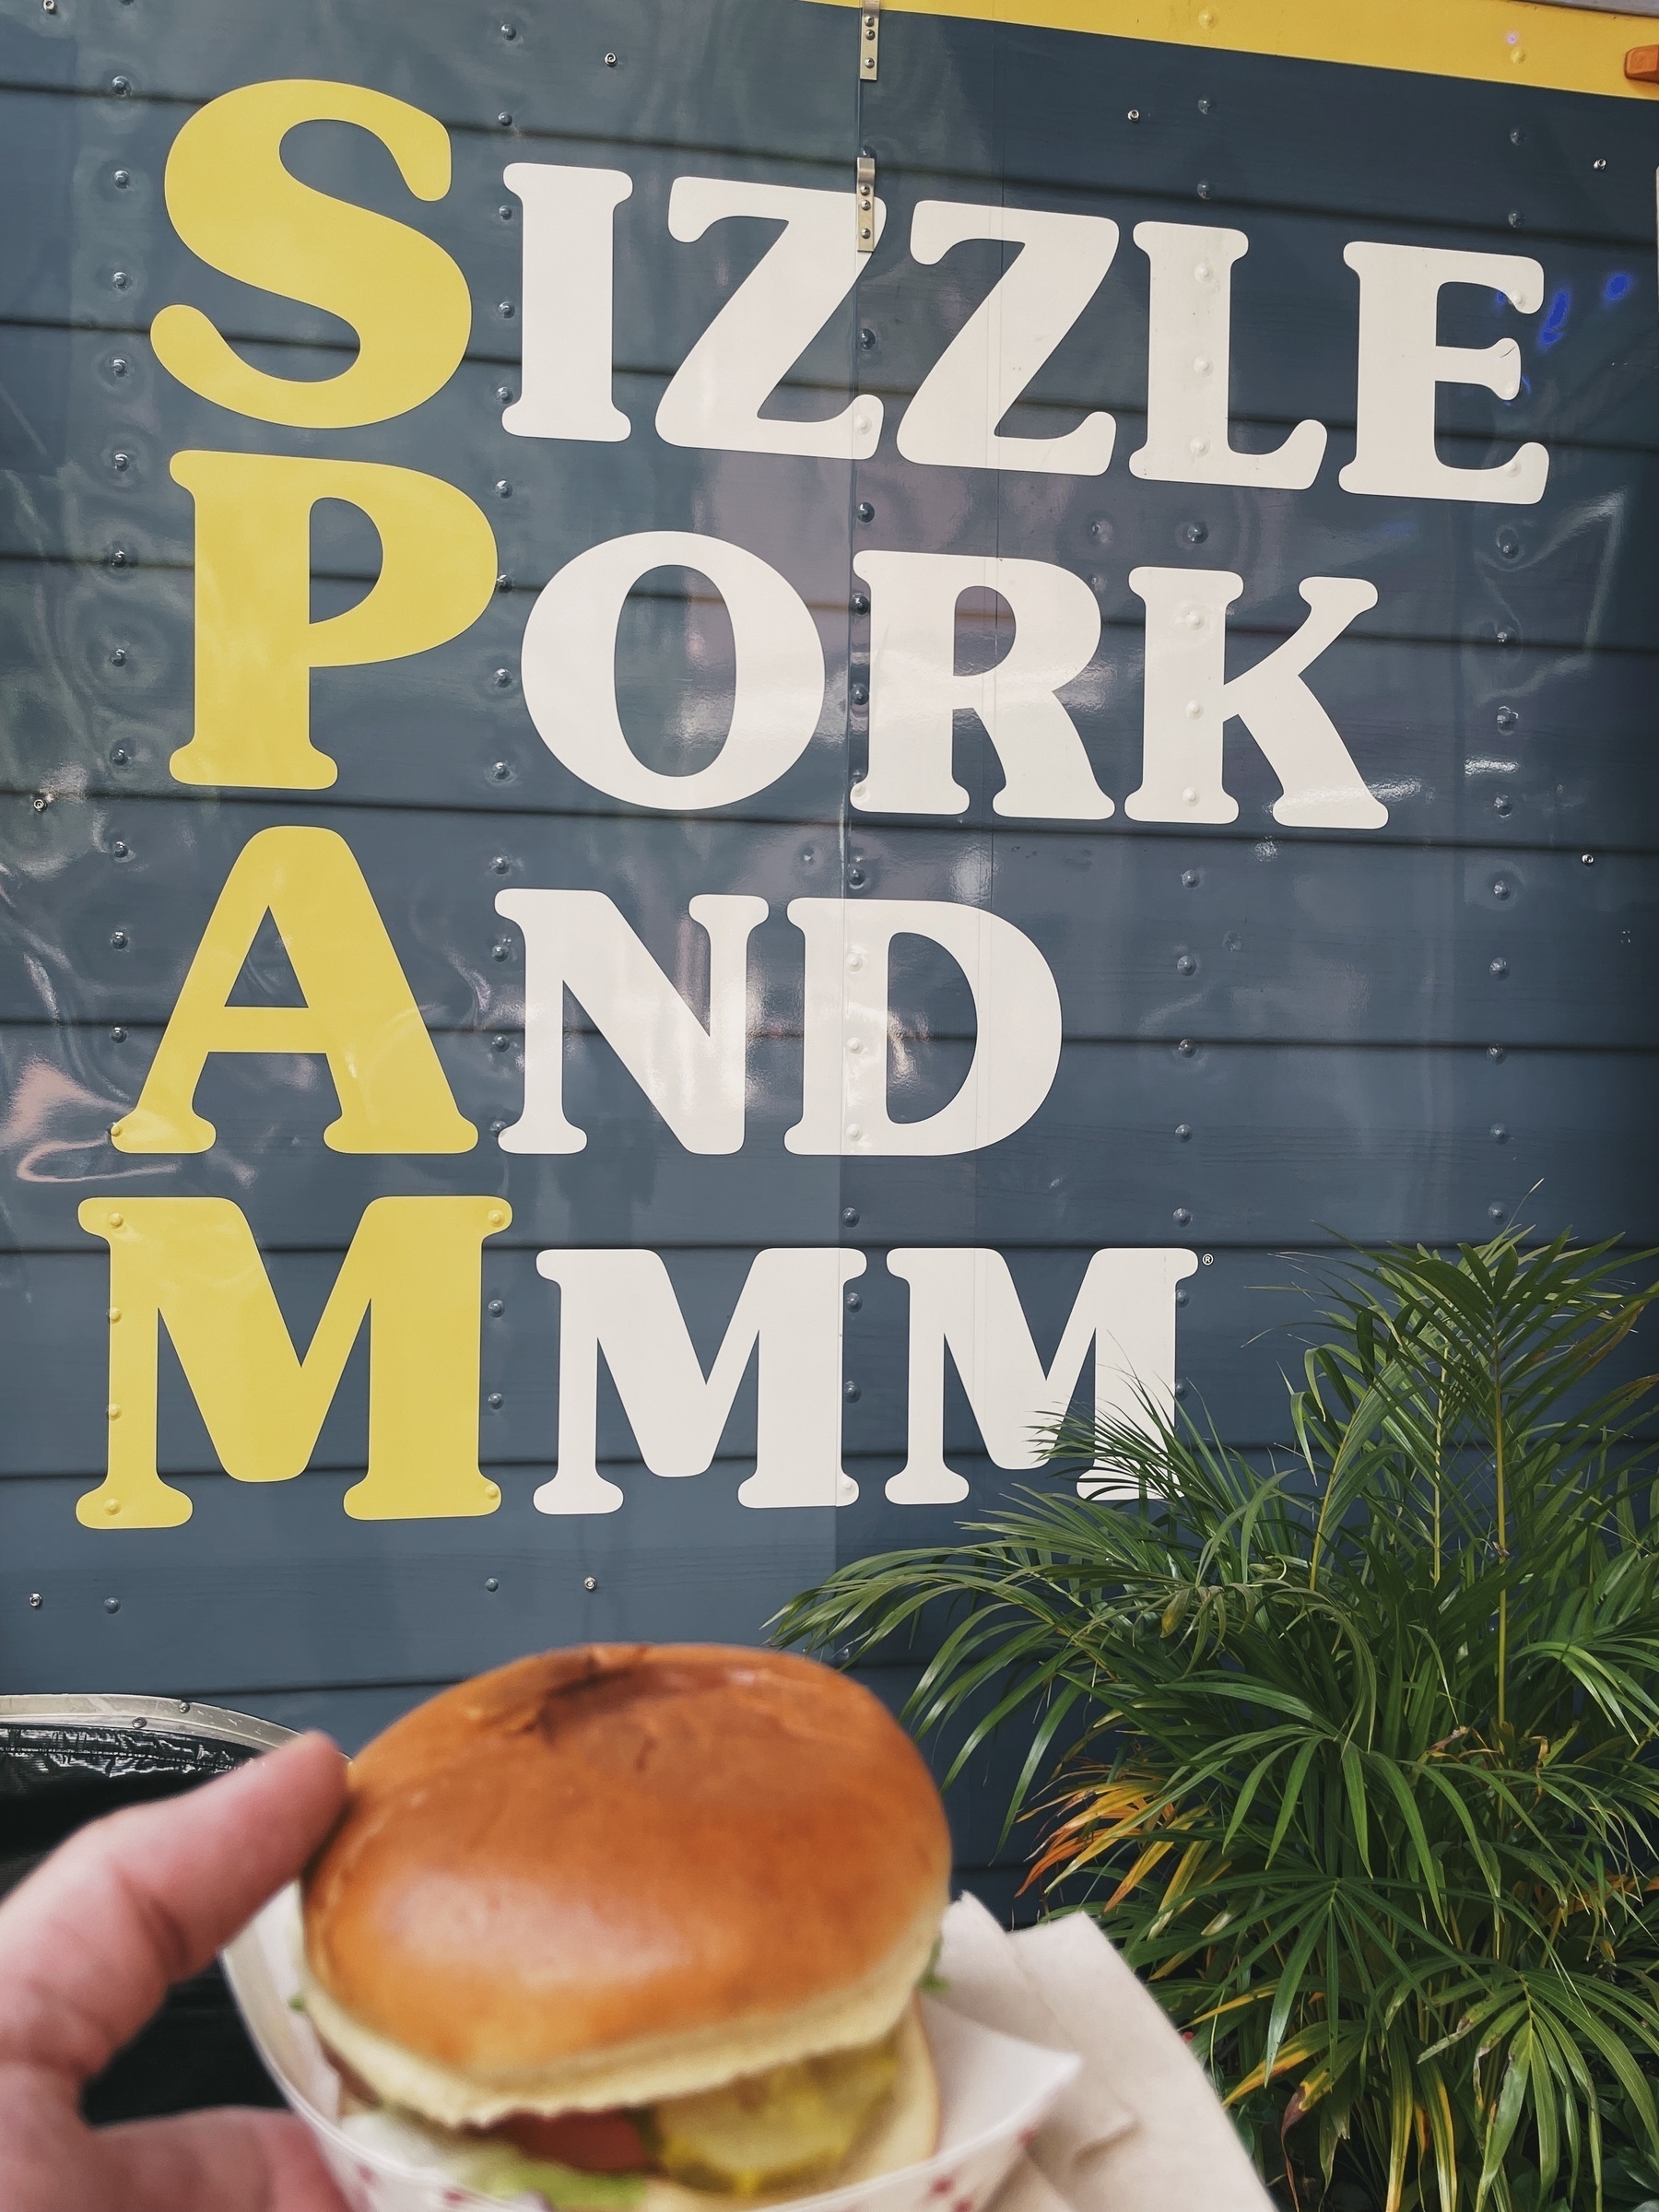 SPAM Burger positioned in front of vendor sign